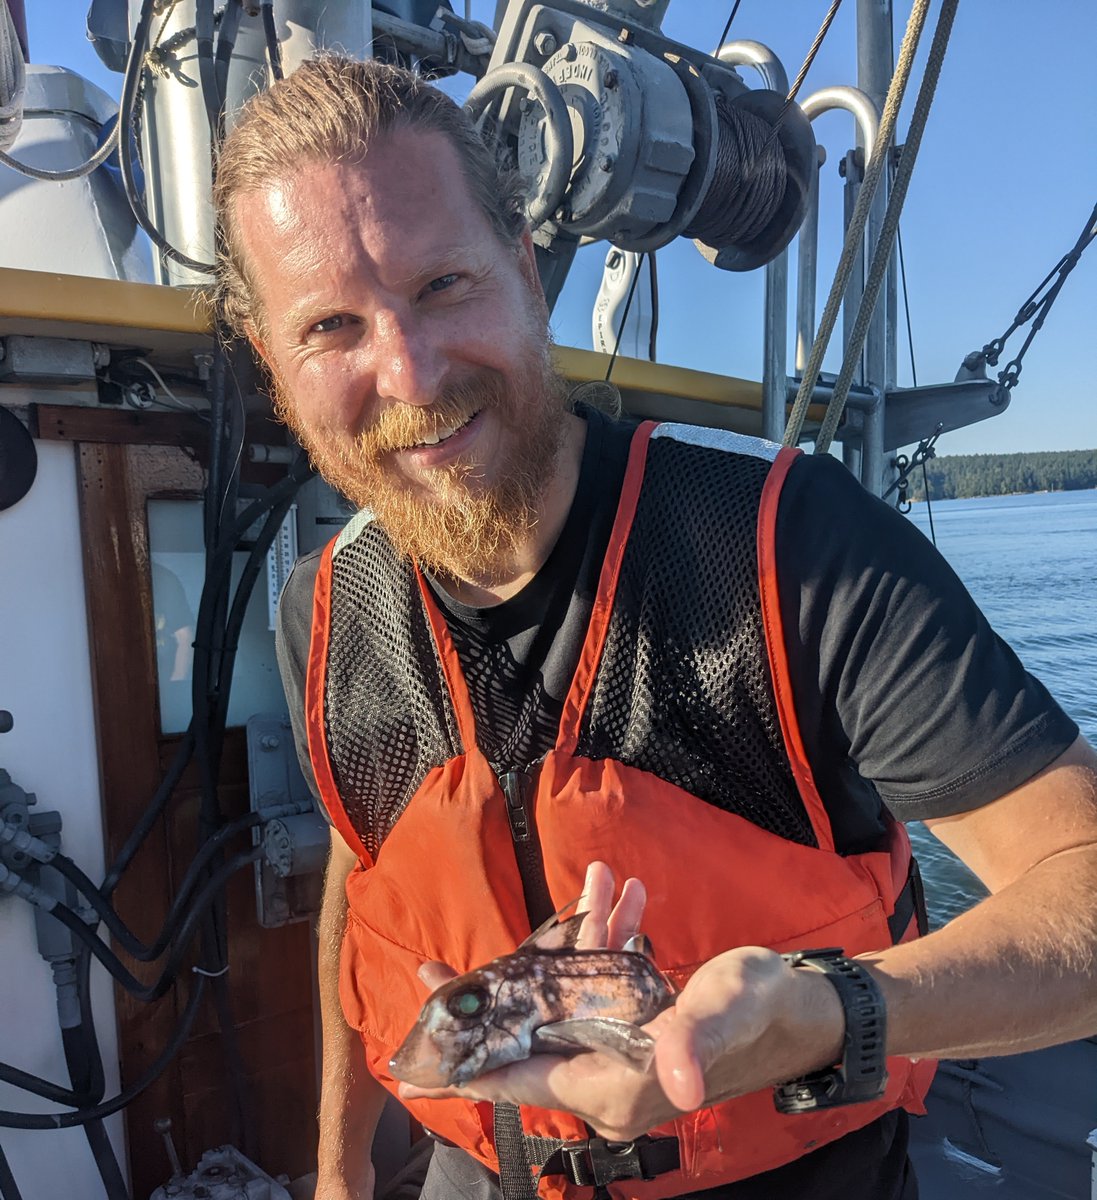 Read this week's Member Spotlight on Dr. Gareth Fraser and his research on hammerhead sharks! He was a senior author on a paper published in @DevelopmentalDy. ow.ly/G0aM50Q57PS #AnatomyConnected24 #anatomy #science #research #education #AmericanAssociationForAnatomy